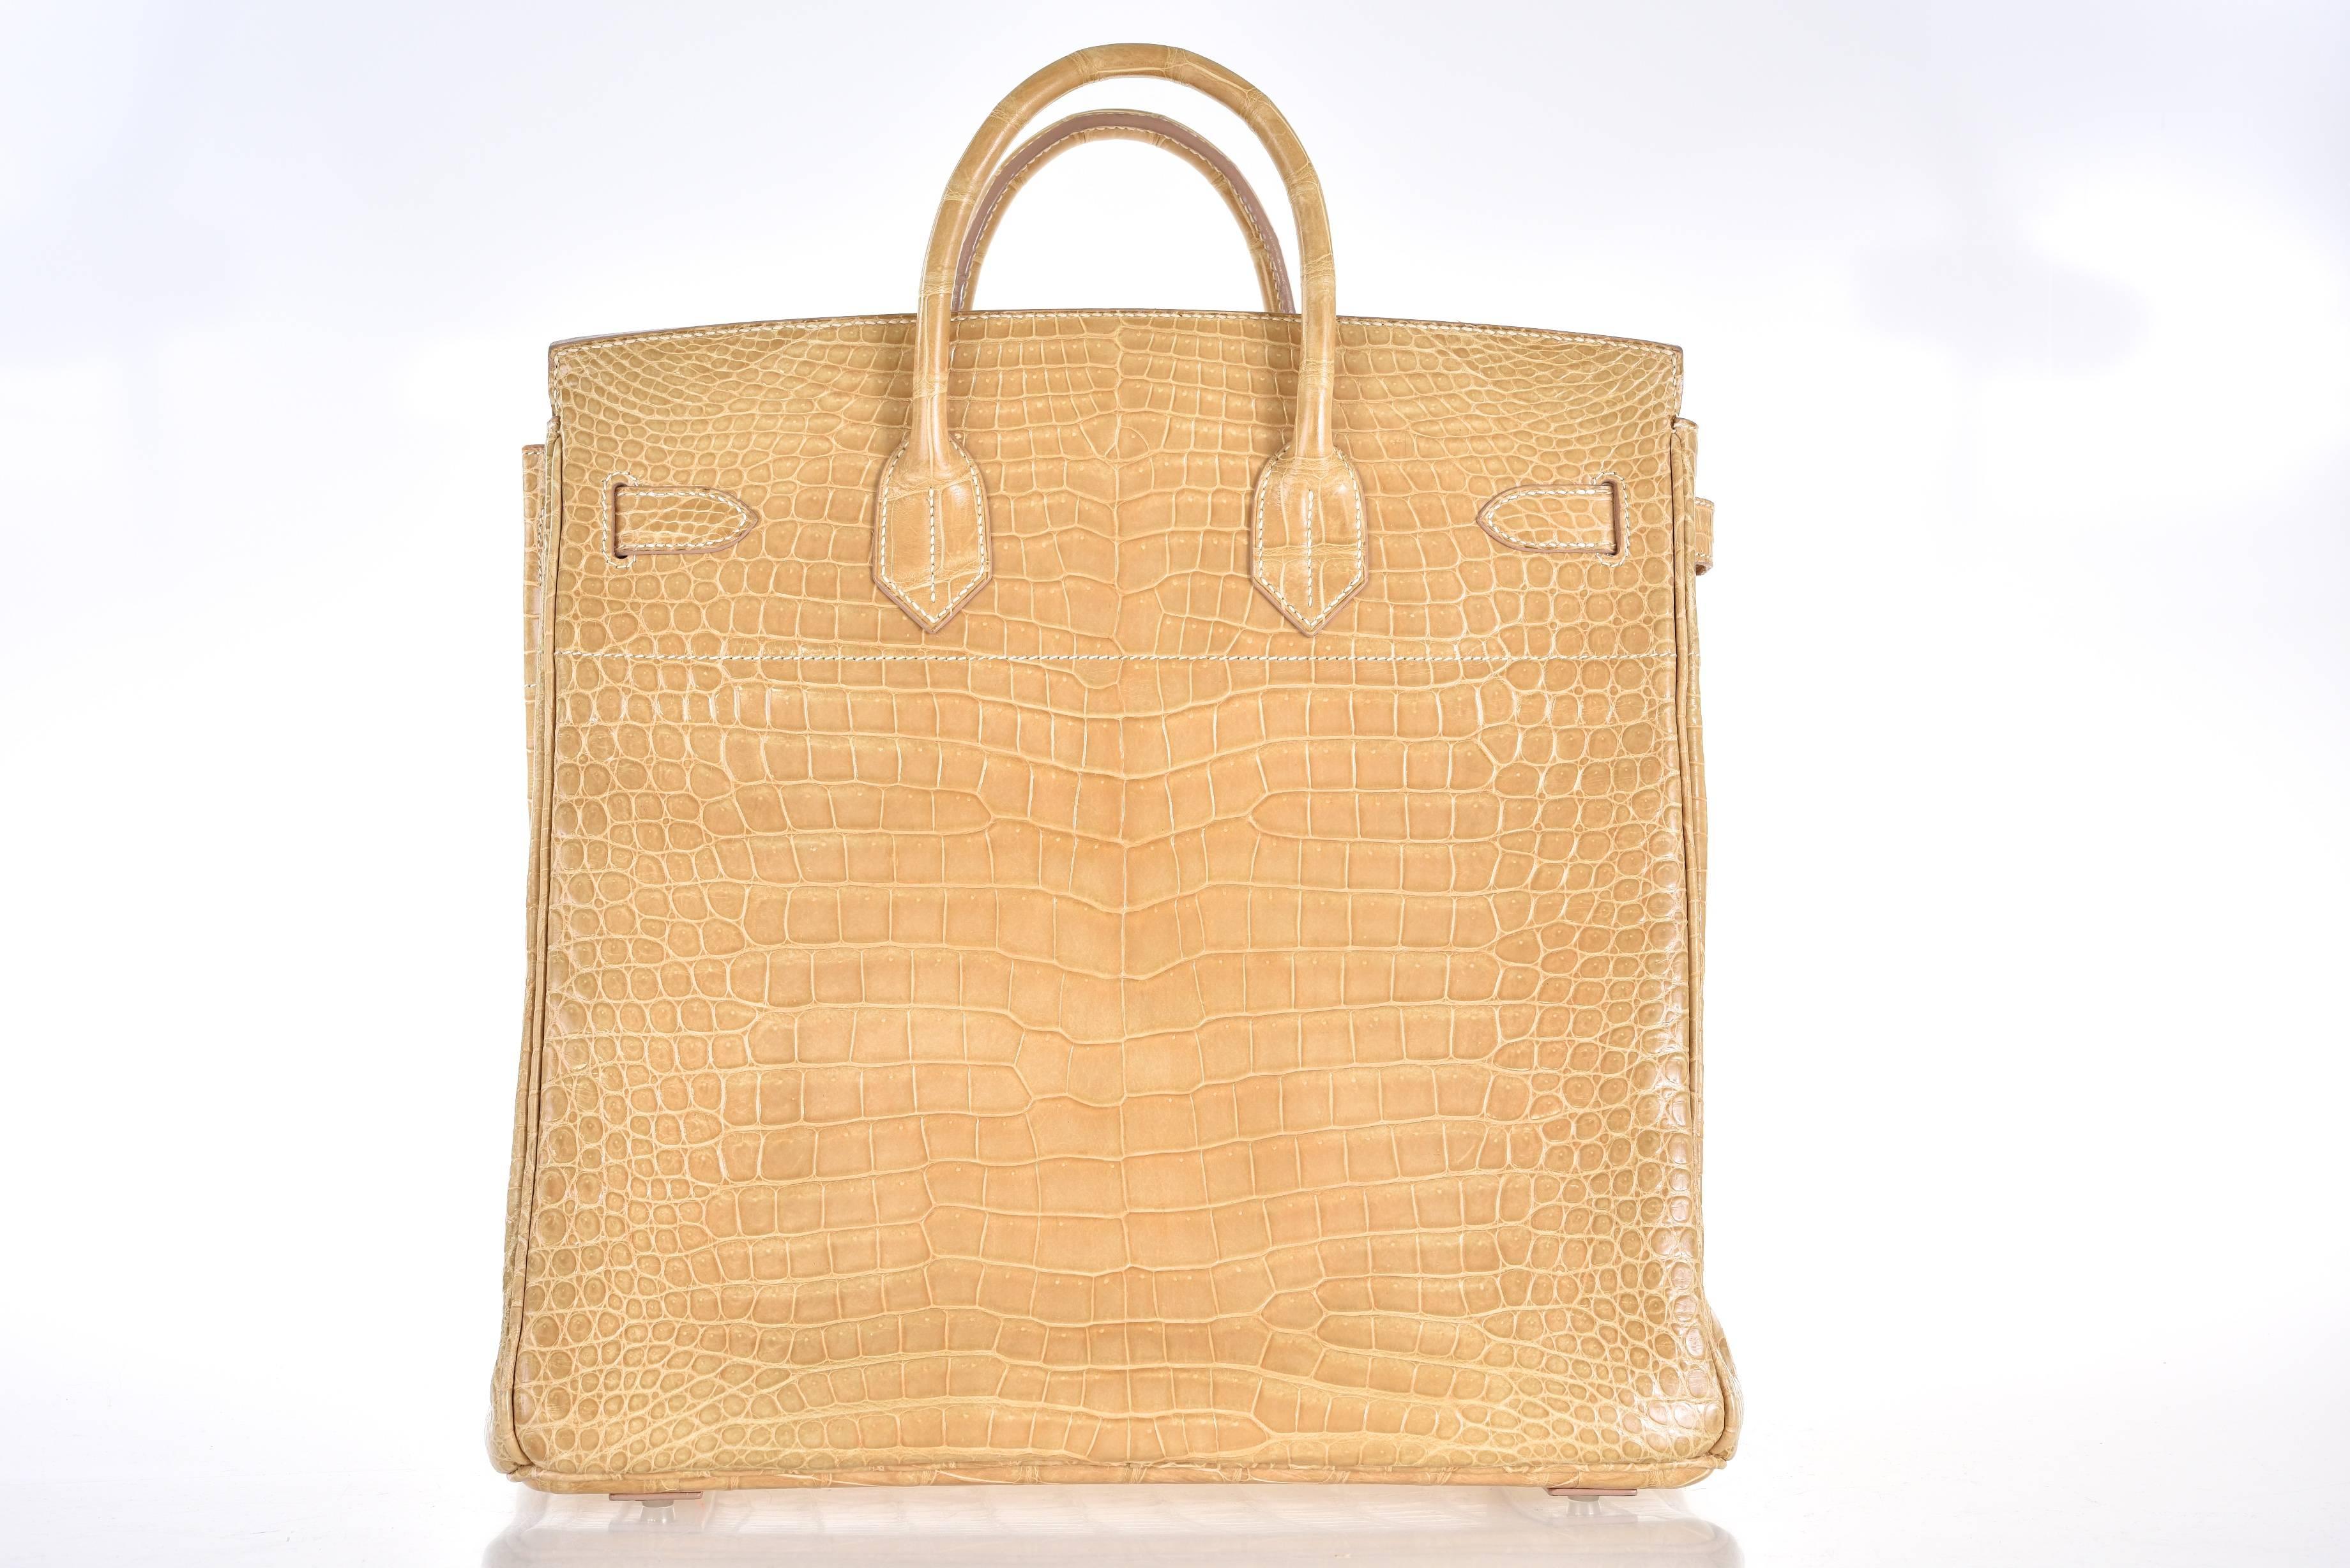 Hermes 40cm HAC Birkin Poussiere Porosus Crocodile JaneFinds In Excellent Condition For Sale In NYC Tri-State/Miami, NY